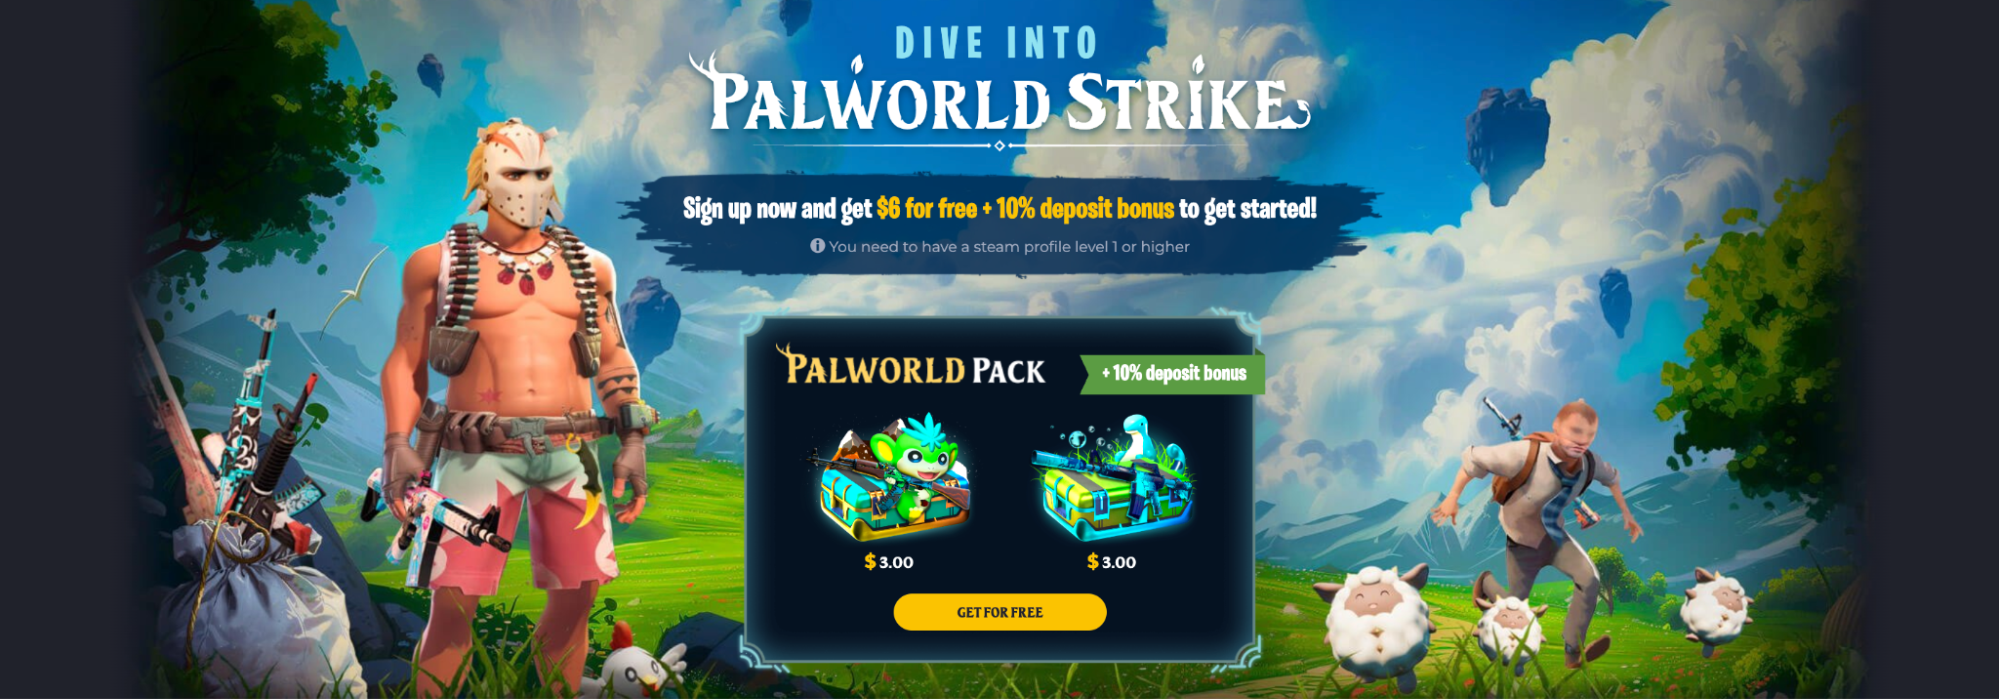 FarmSkins Promo Code for February 2024: Get Free Cases and Bonuses | Palworld | CS2 Cases